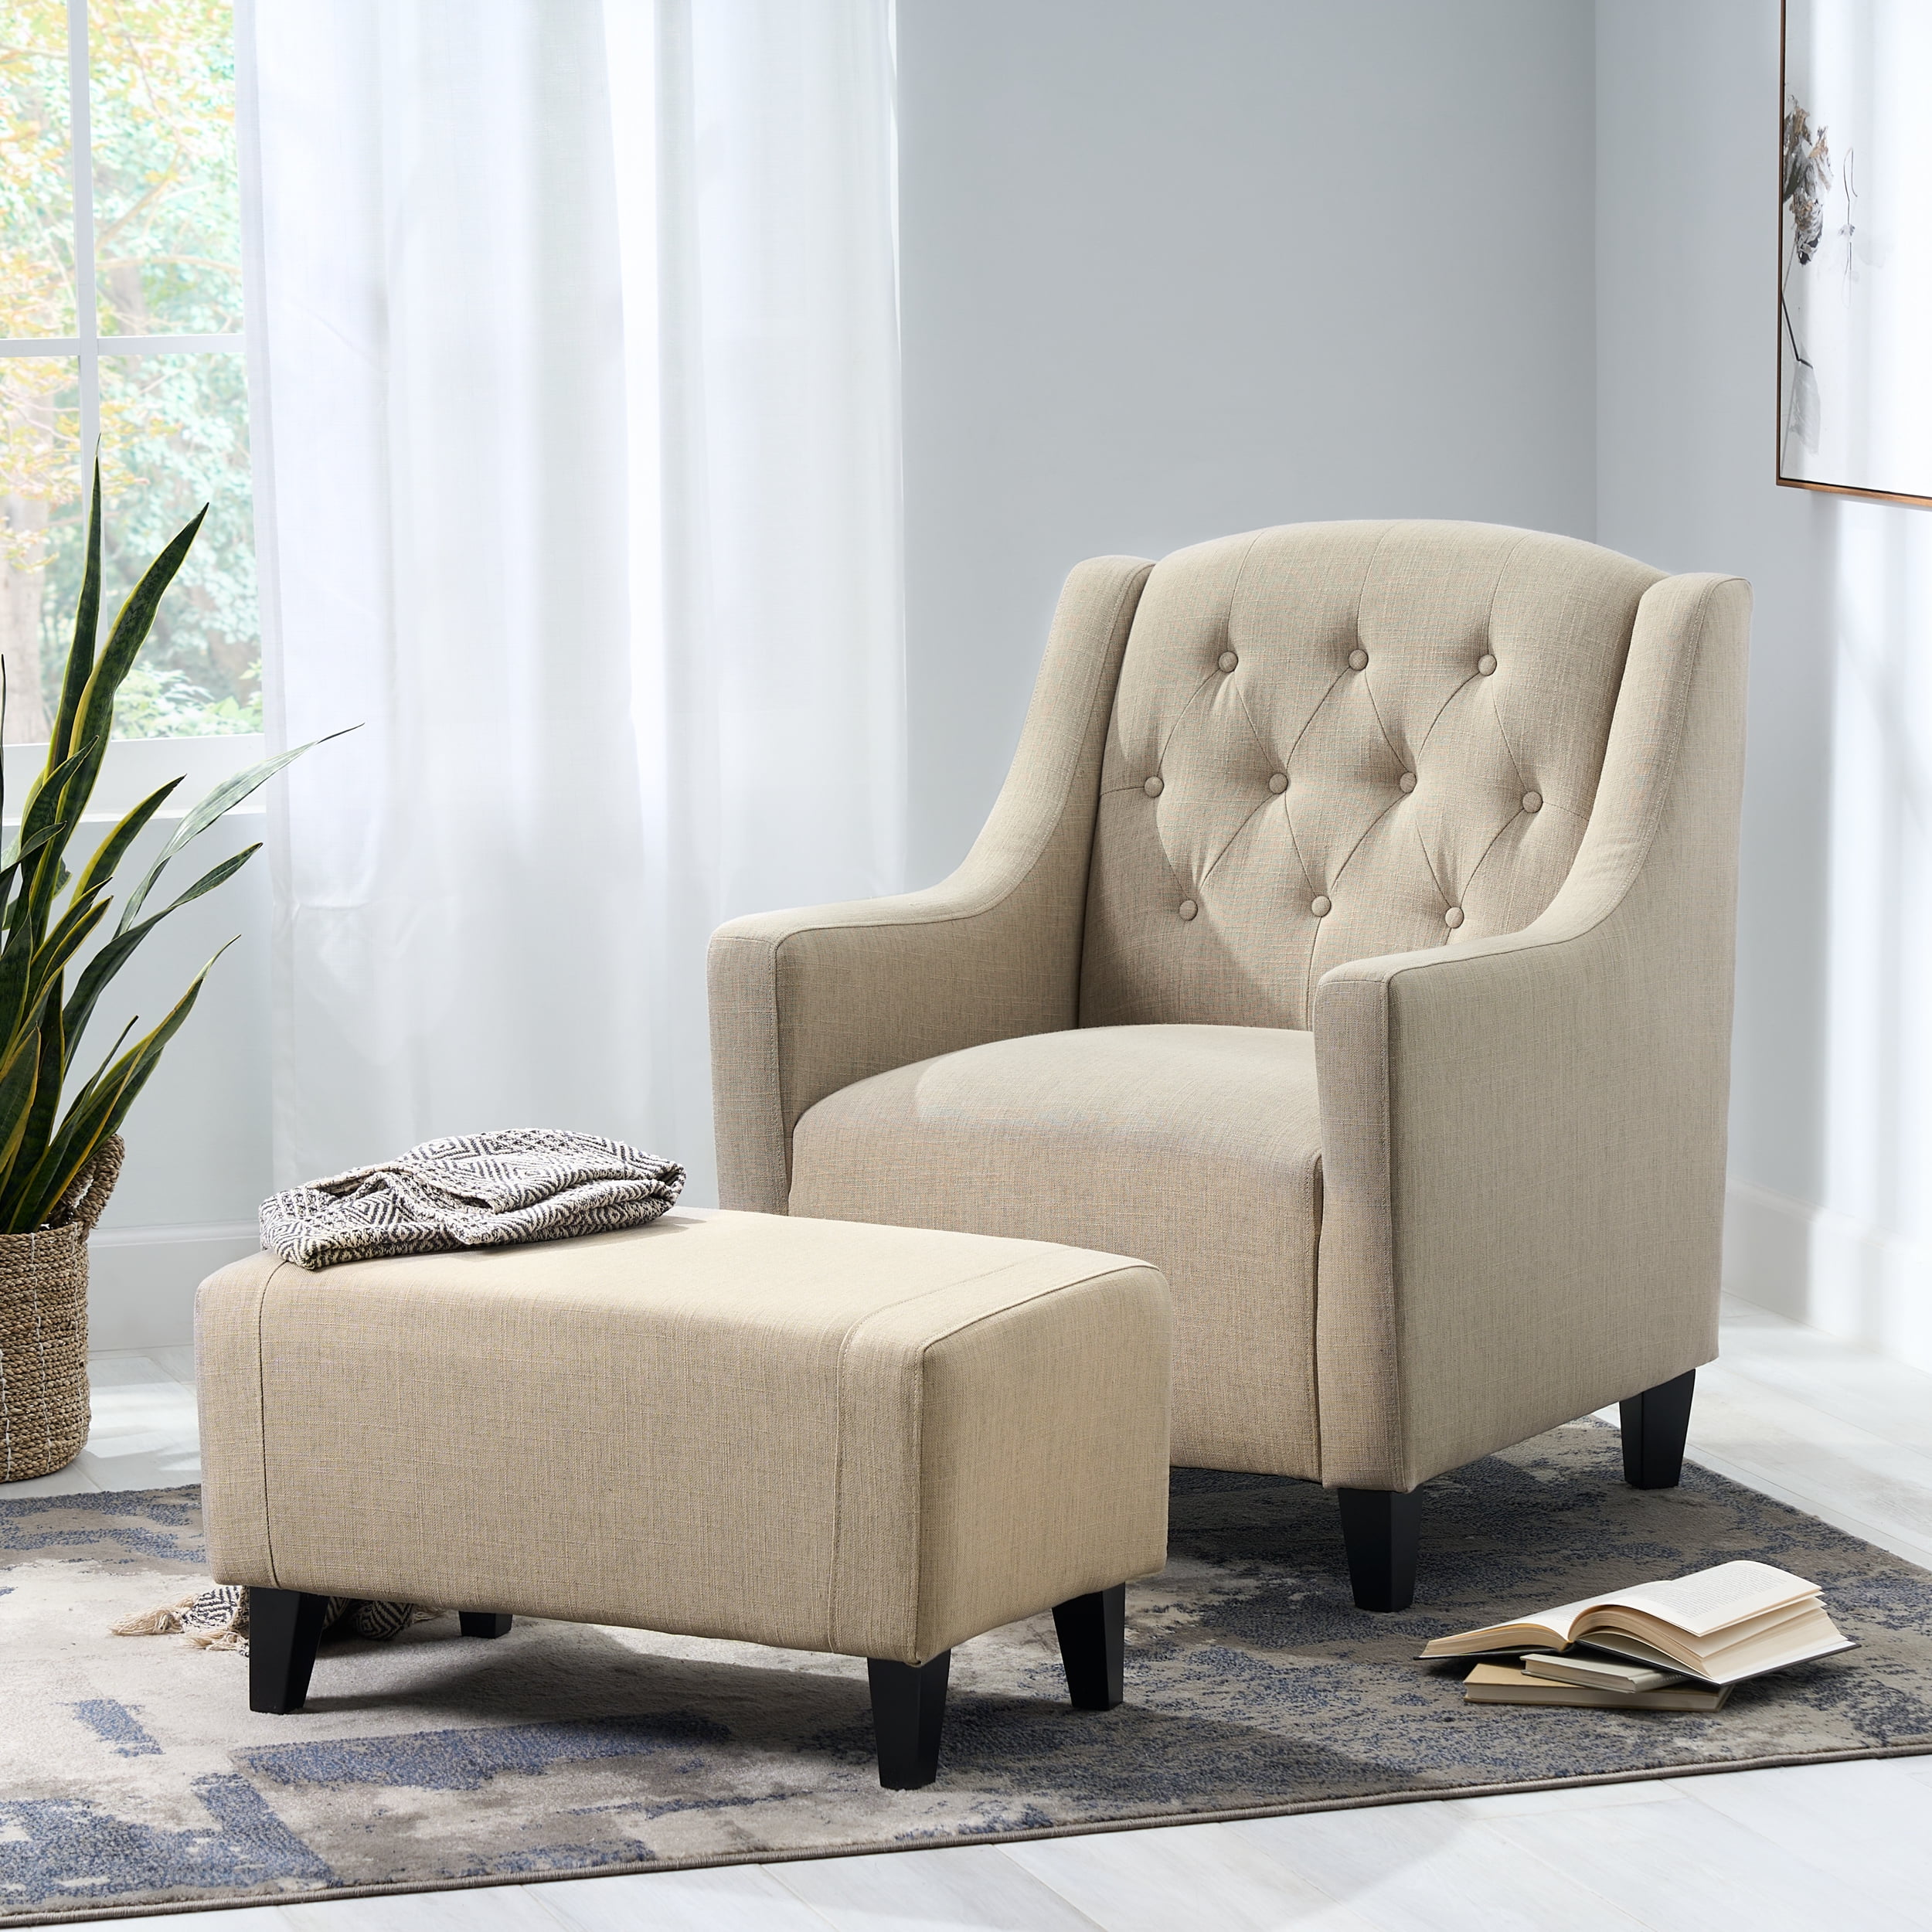 Empierre Tufted Light Beige Fabric Chair and Ottoman – GDFStudio